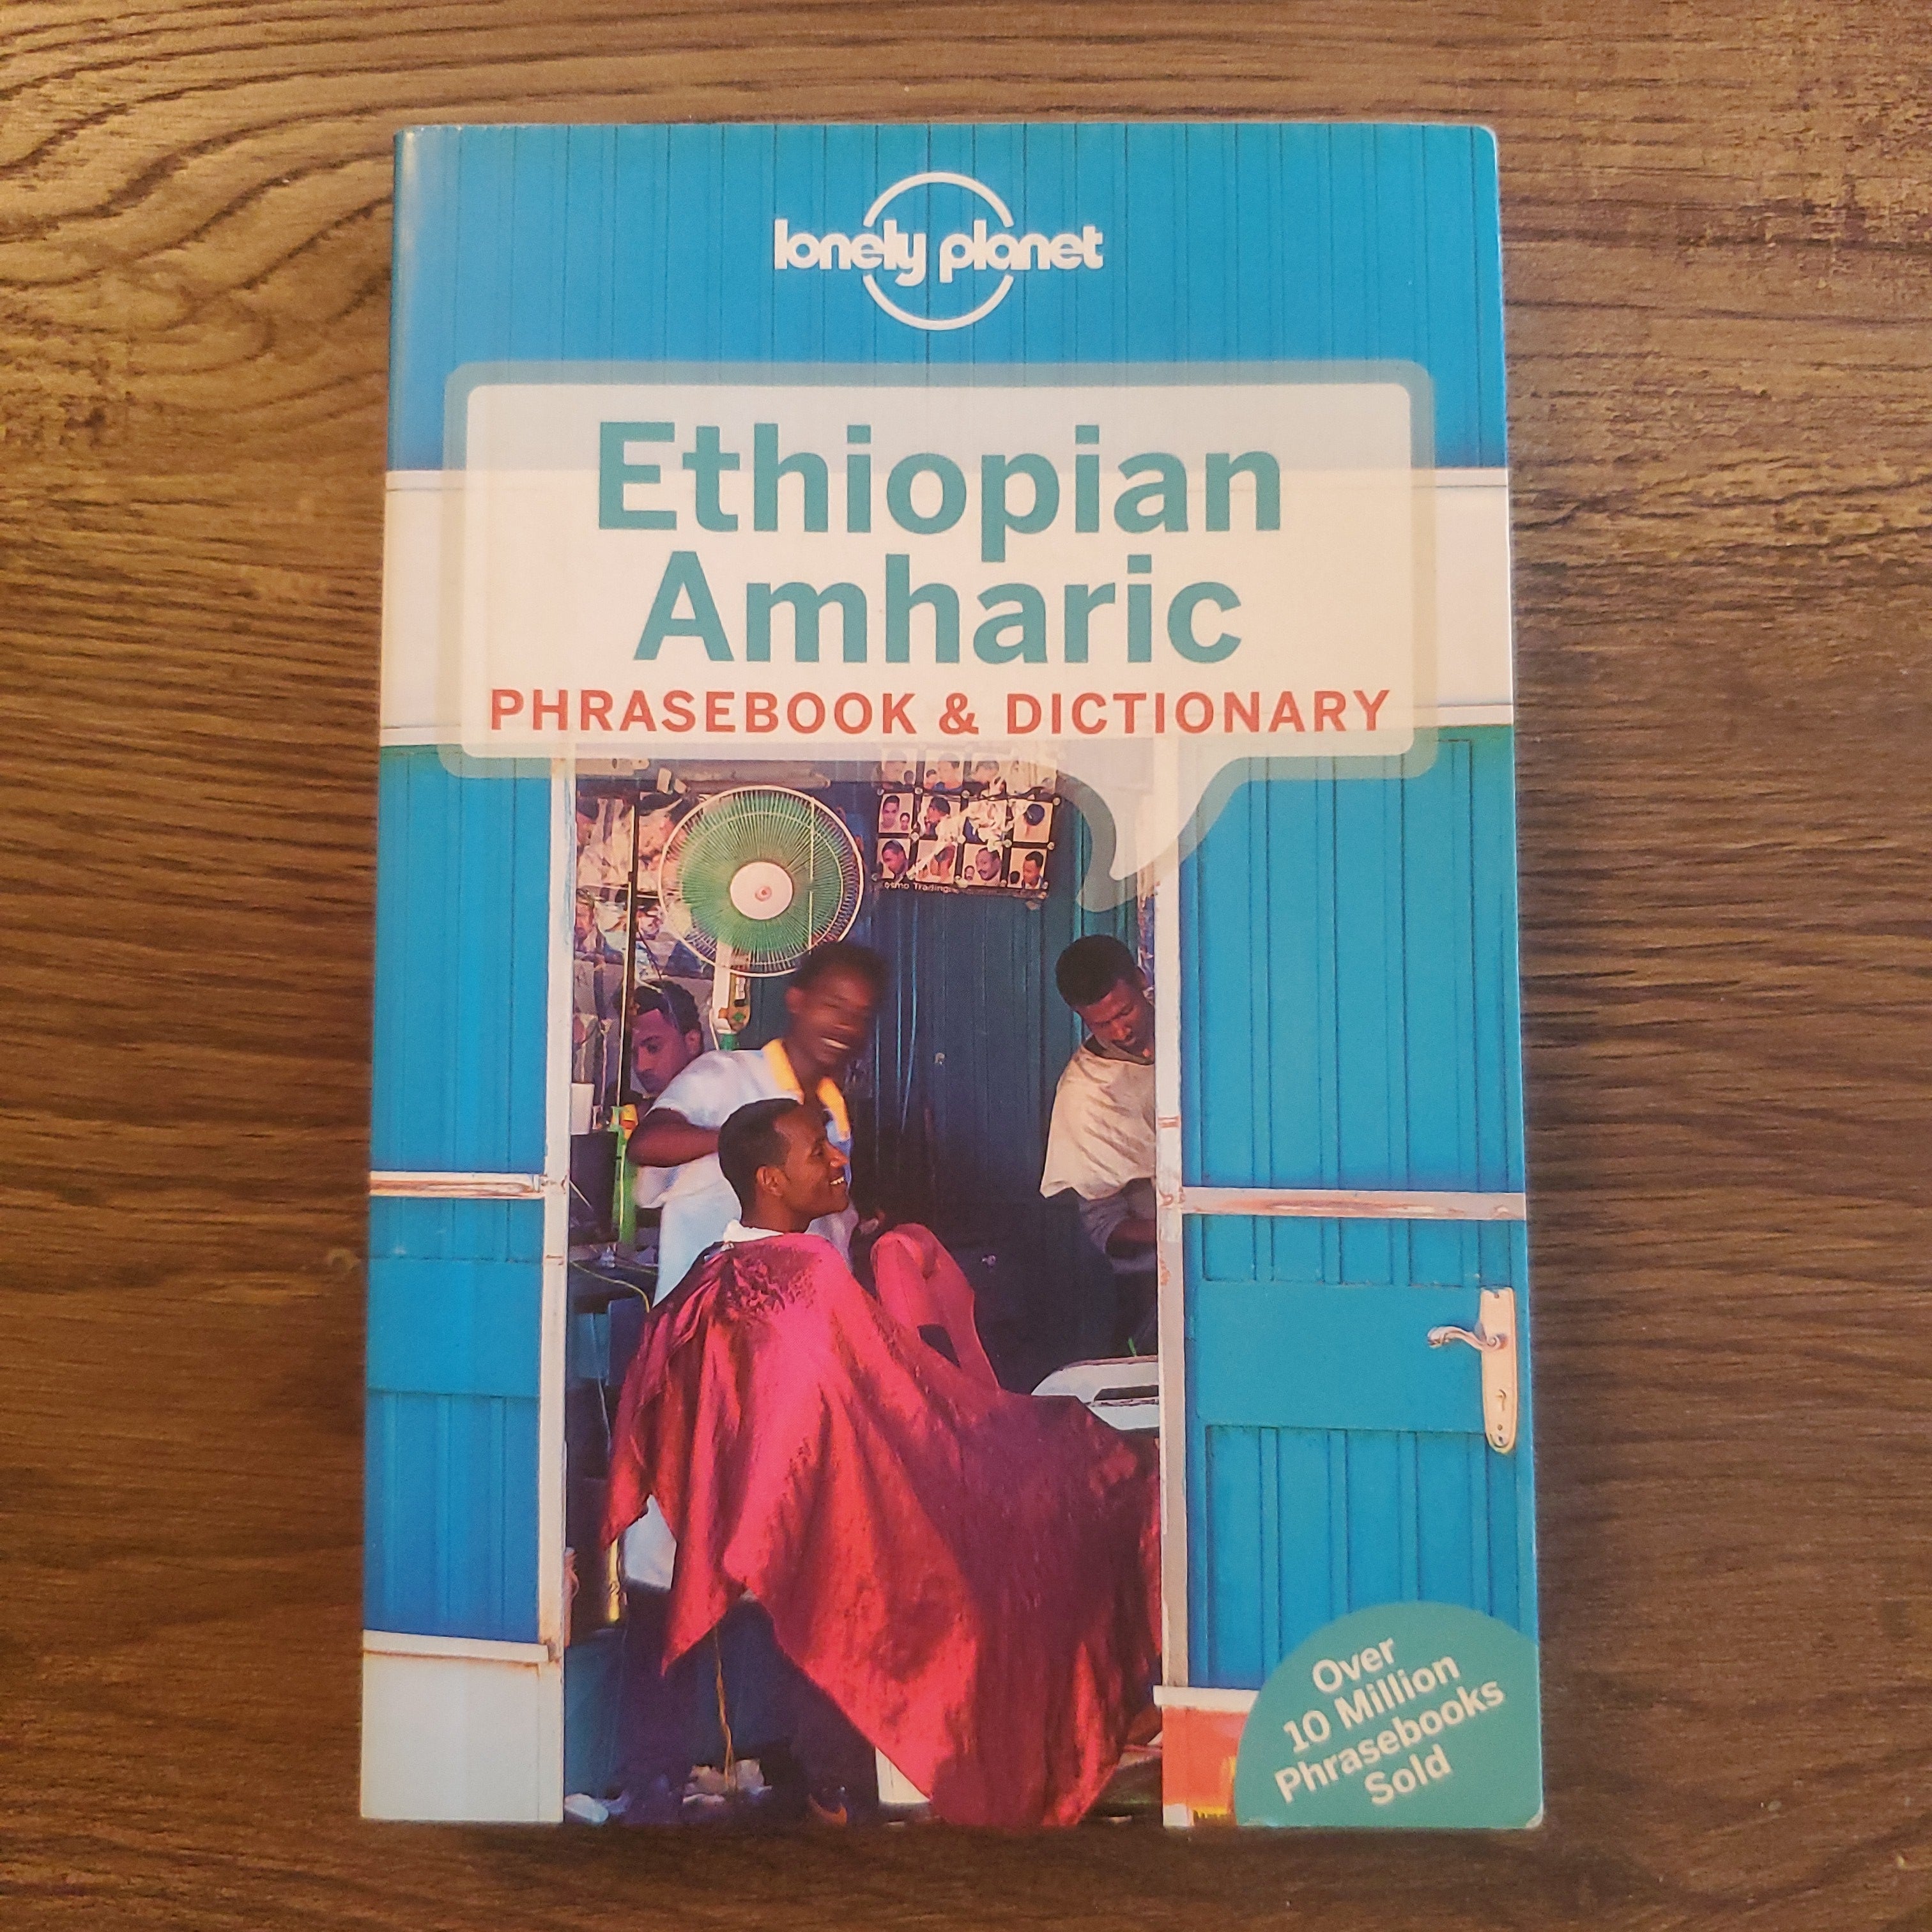 Aboye　Ethiopian　Pangobooks　Amharic　by　Phrasebook　Planet　Dictionary　Daniel　Aberra,　Paperback　Lonely　and